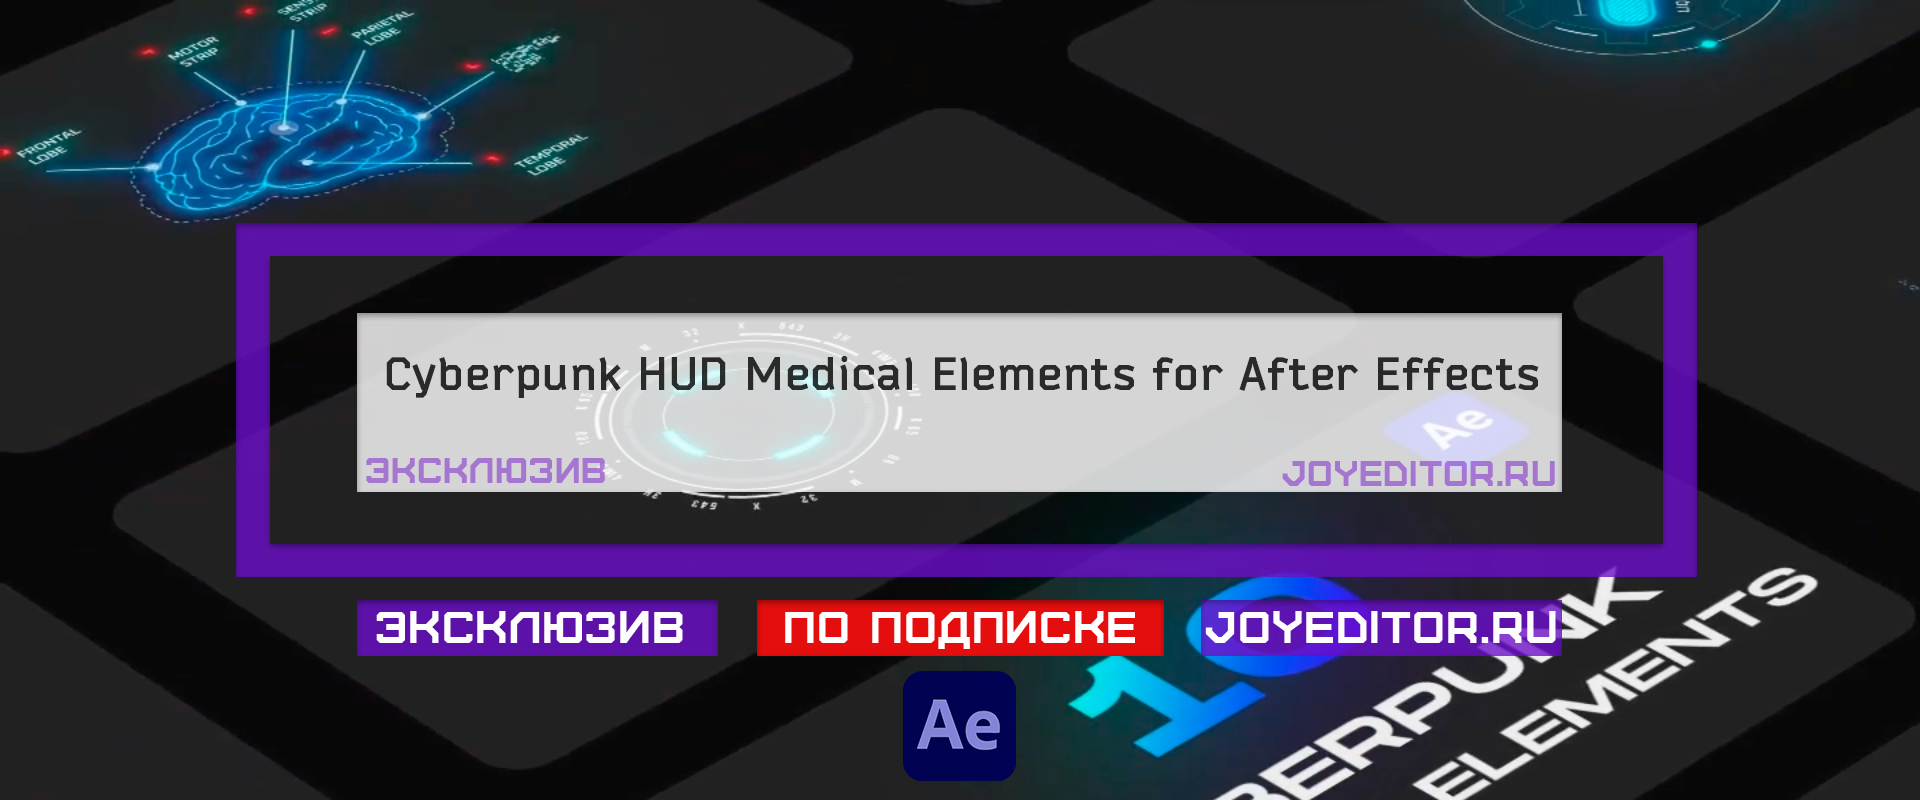 Cyberpunk hud elements for after effects torrent (120) фото